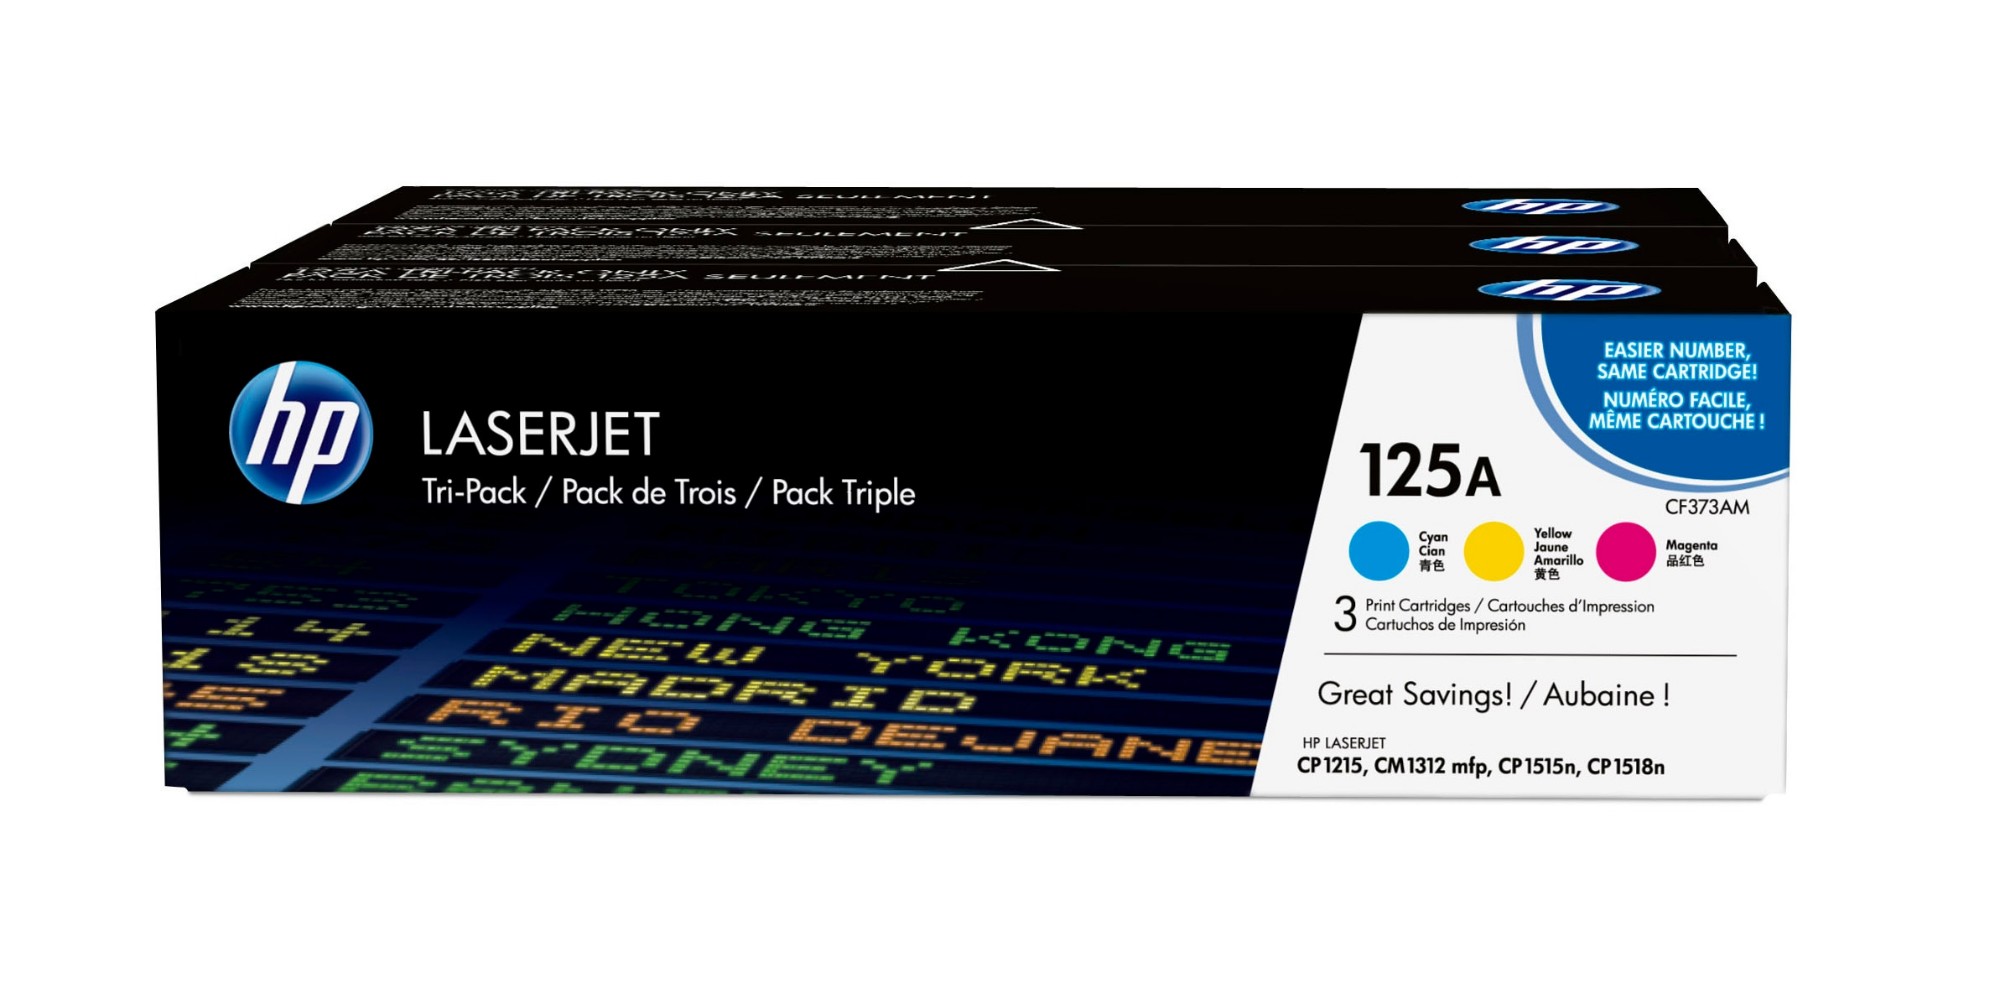 HP CF373AM/125A Toner cartridge MultiPack C,M,Y, 3x1.4K pages ISO/IEC 19798 Pack=3 for HP CLJ CP 1210